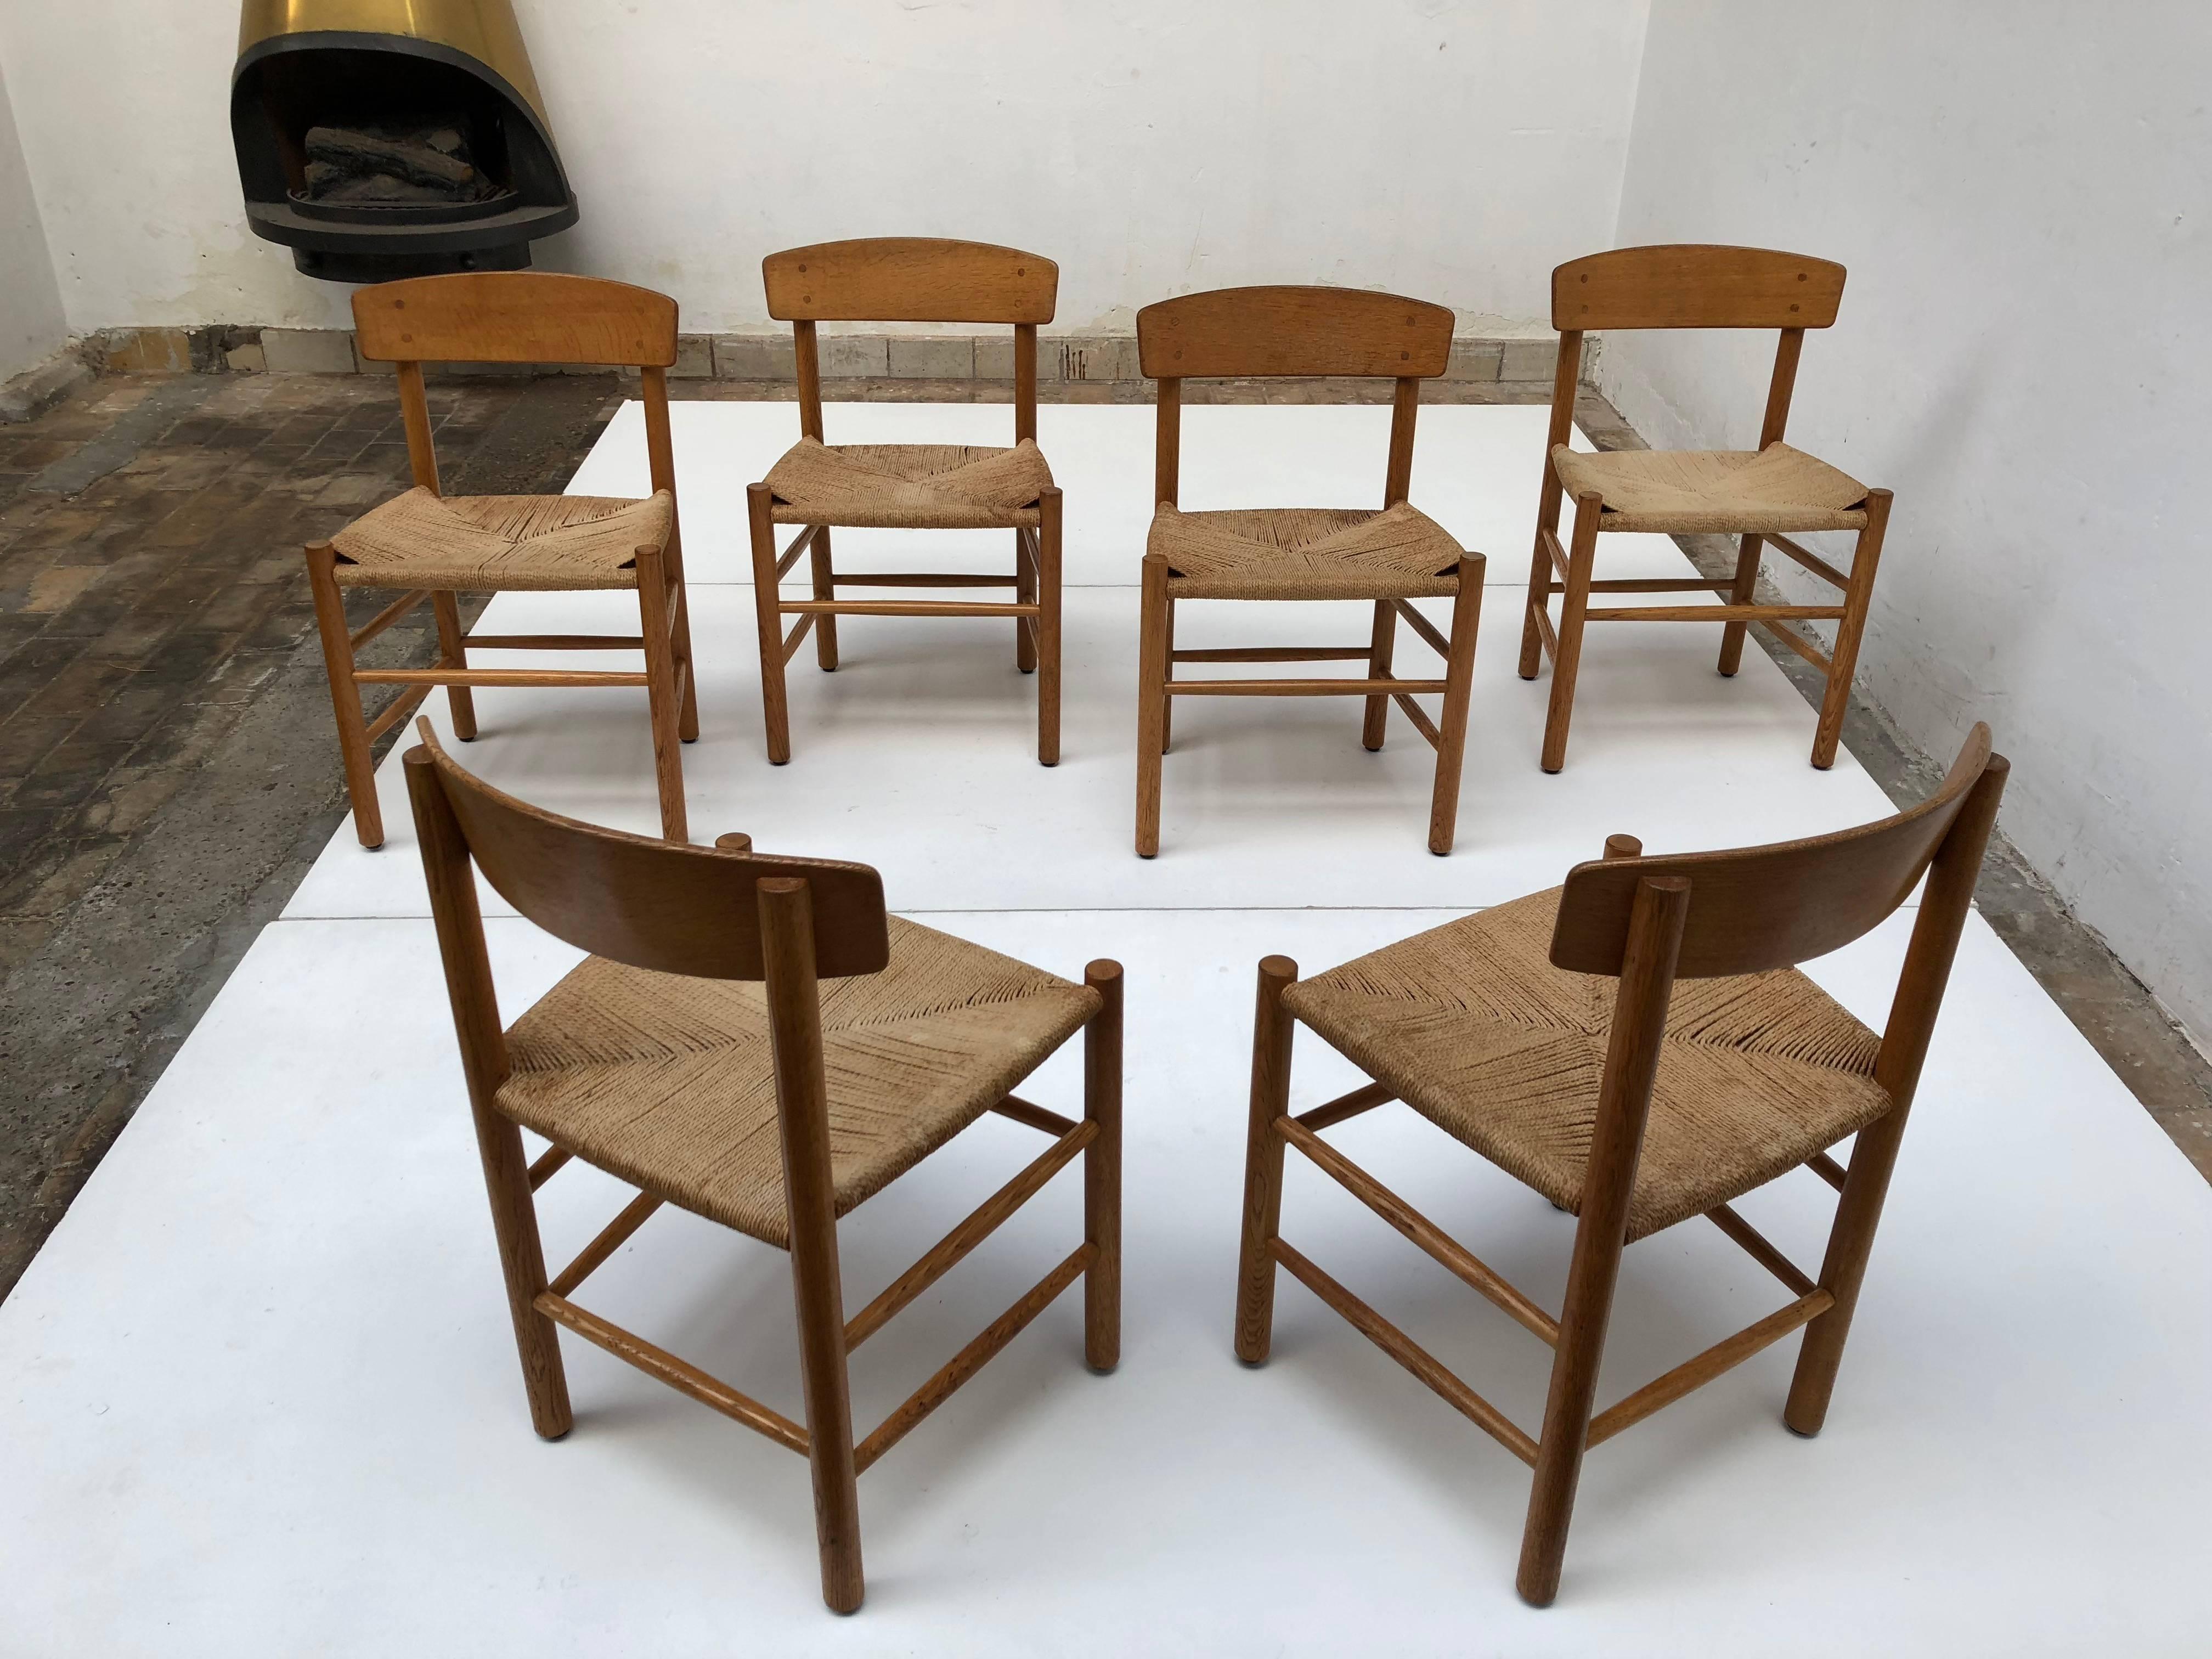 A set of six dining chairs designed by Børge Mogensen for Fredericia

This enduring design is Mogensen's most popular and has been produced since its inception in 1947.
Originally designed for the Danish co-operative FDB while Mogensen was the